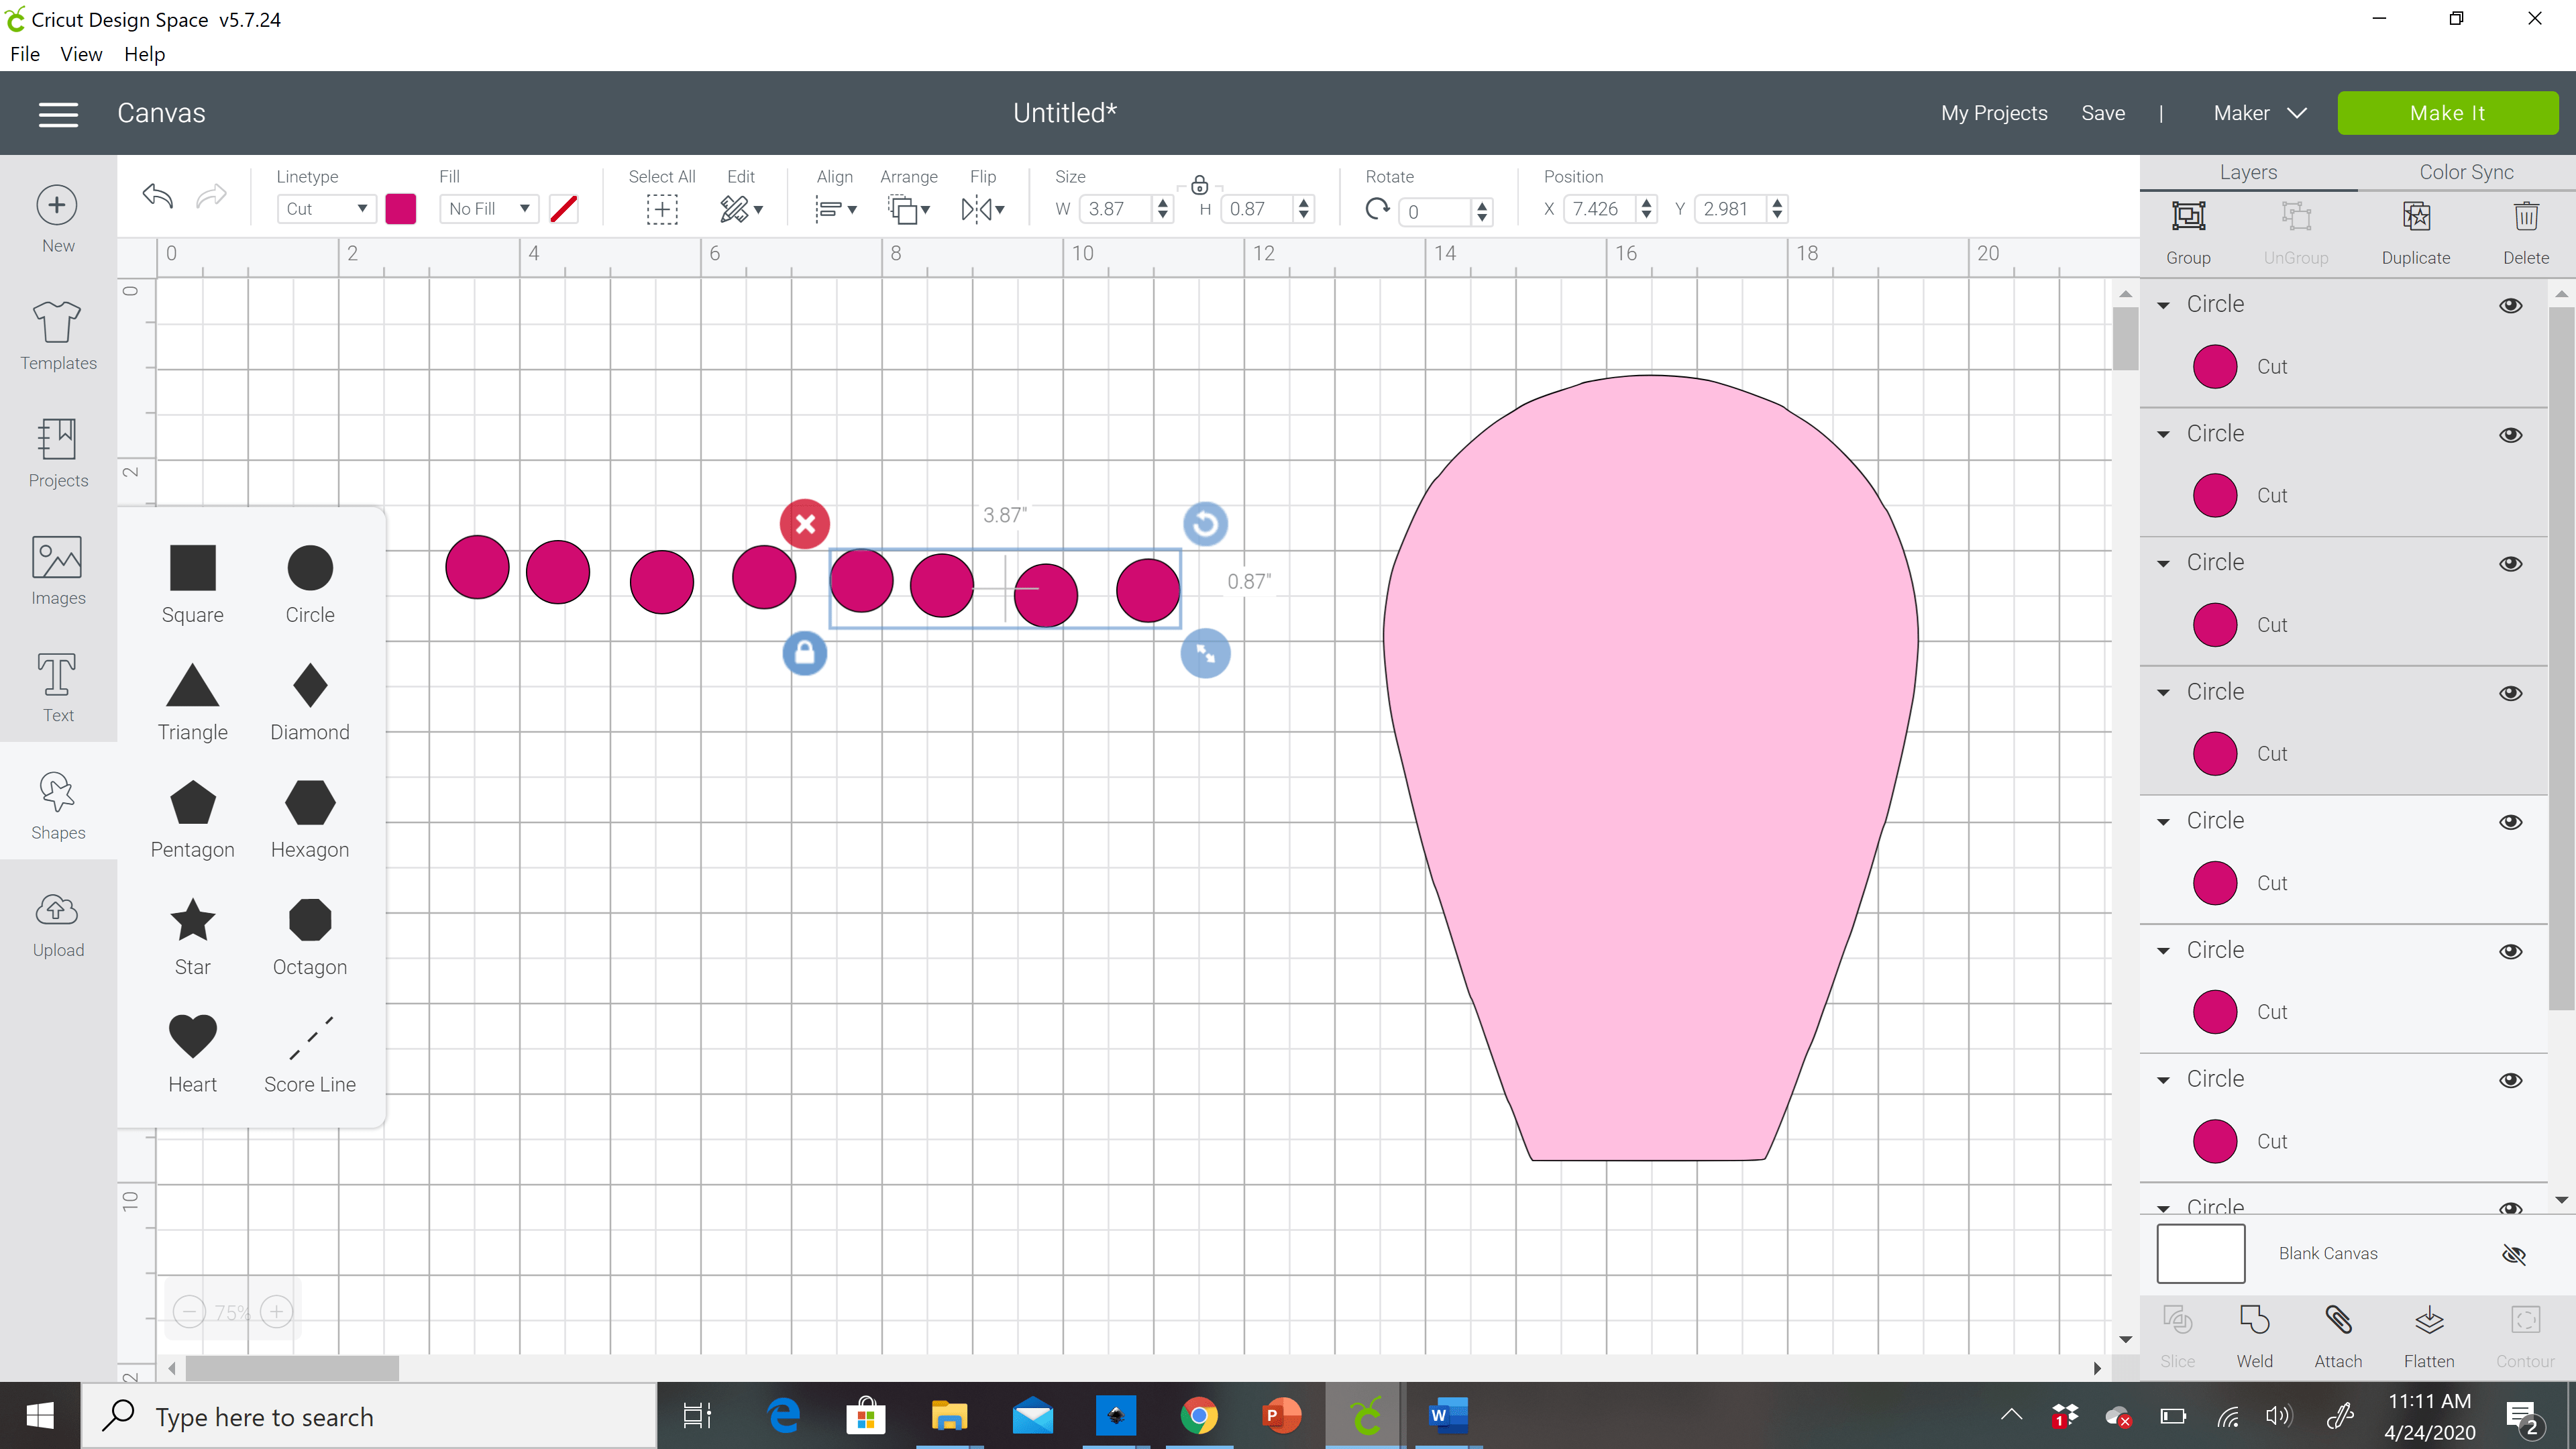 A screenshot of the Cricut Design Space canvas with multiple pink polka dots and a single light pink flower petal design. This demonstrates how to duplicate a pattern.